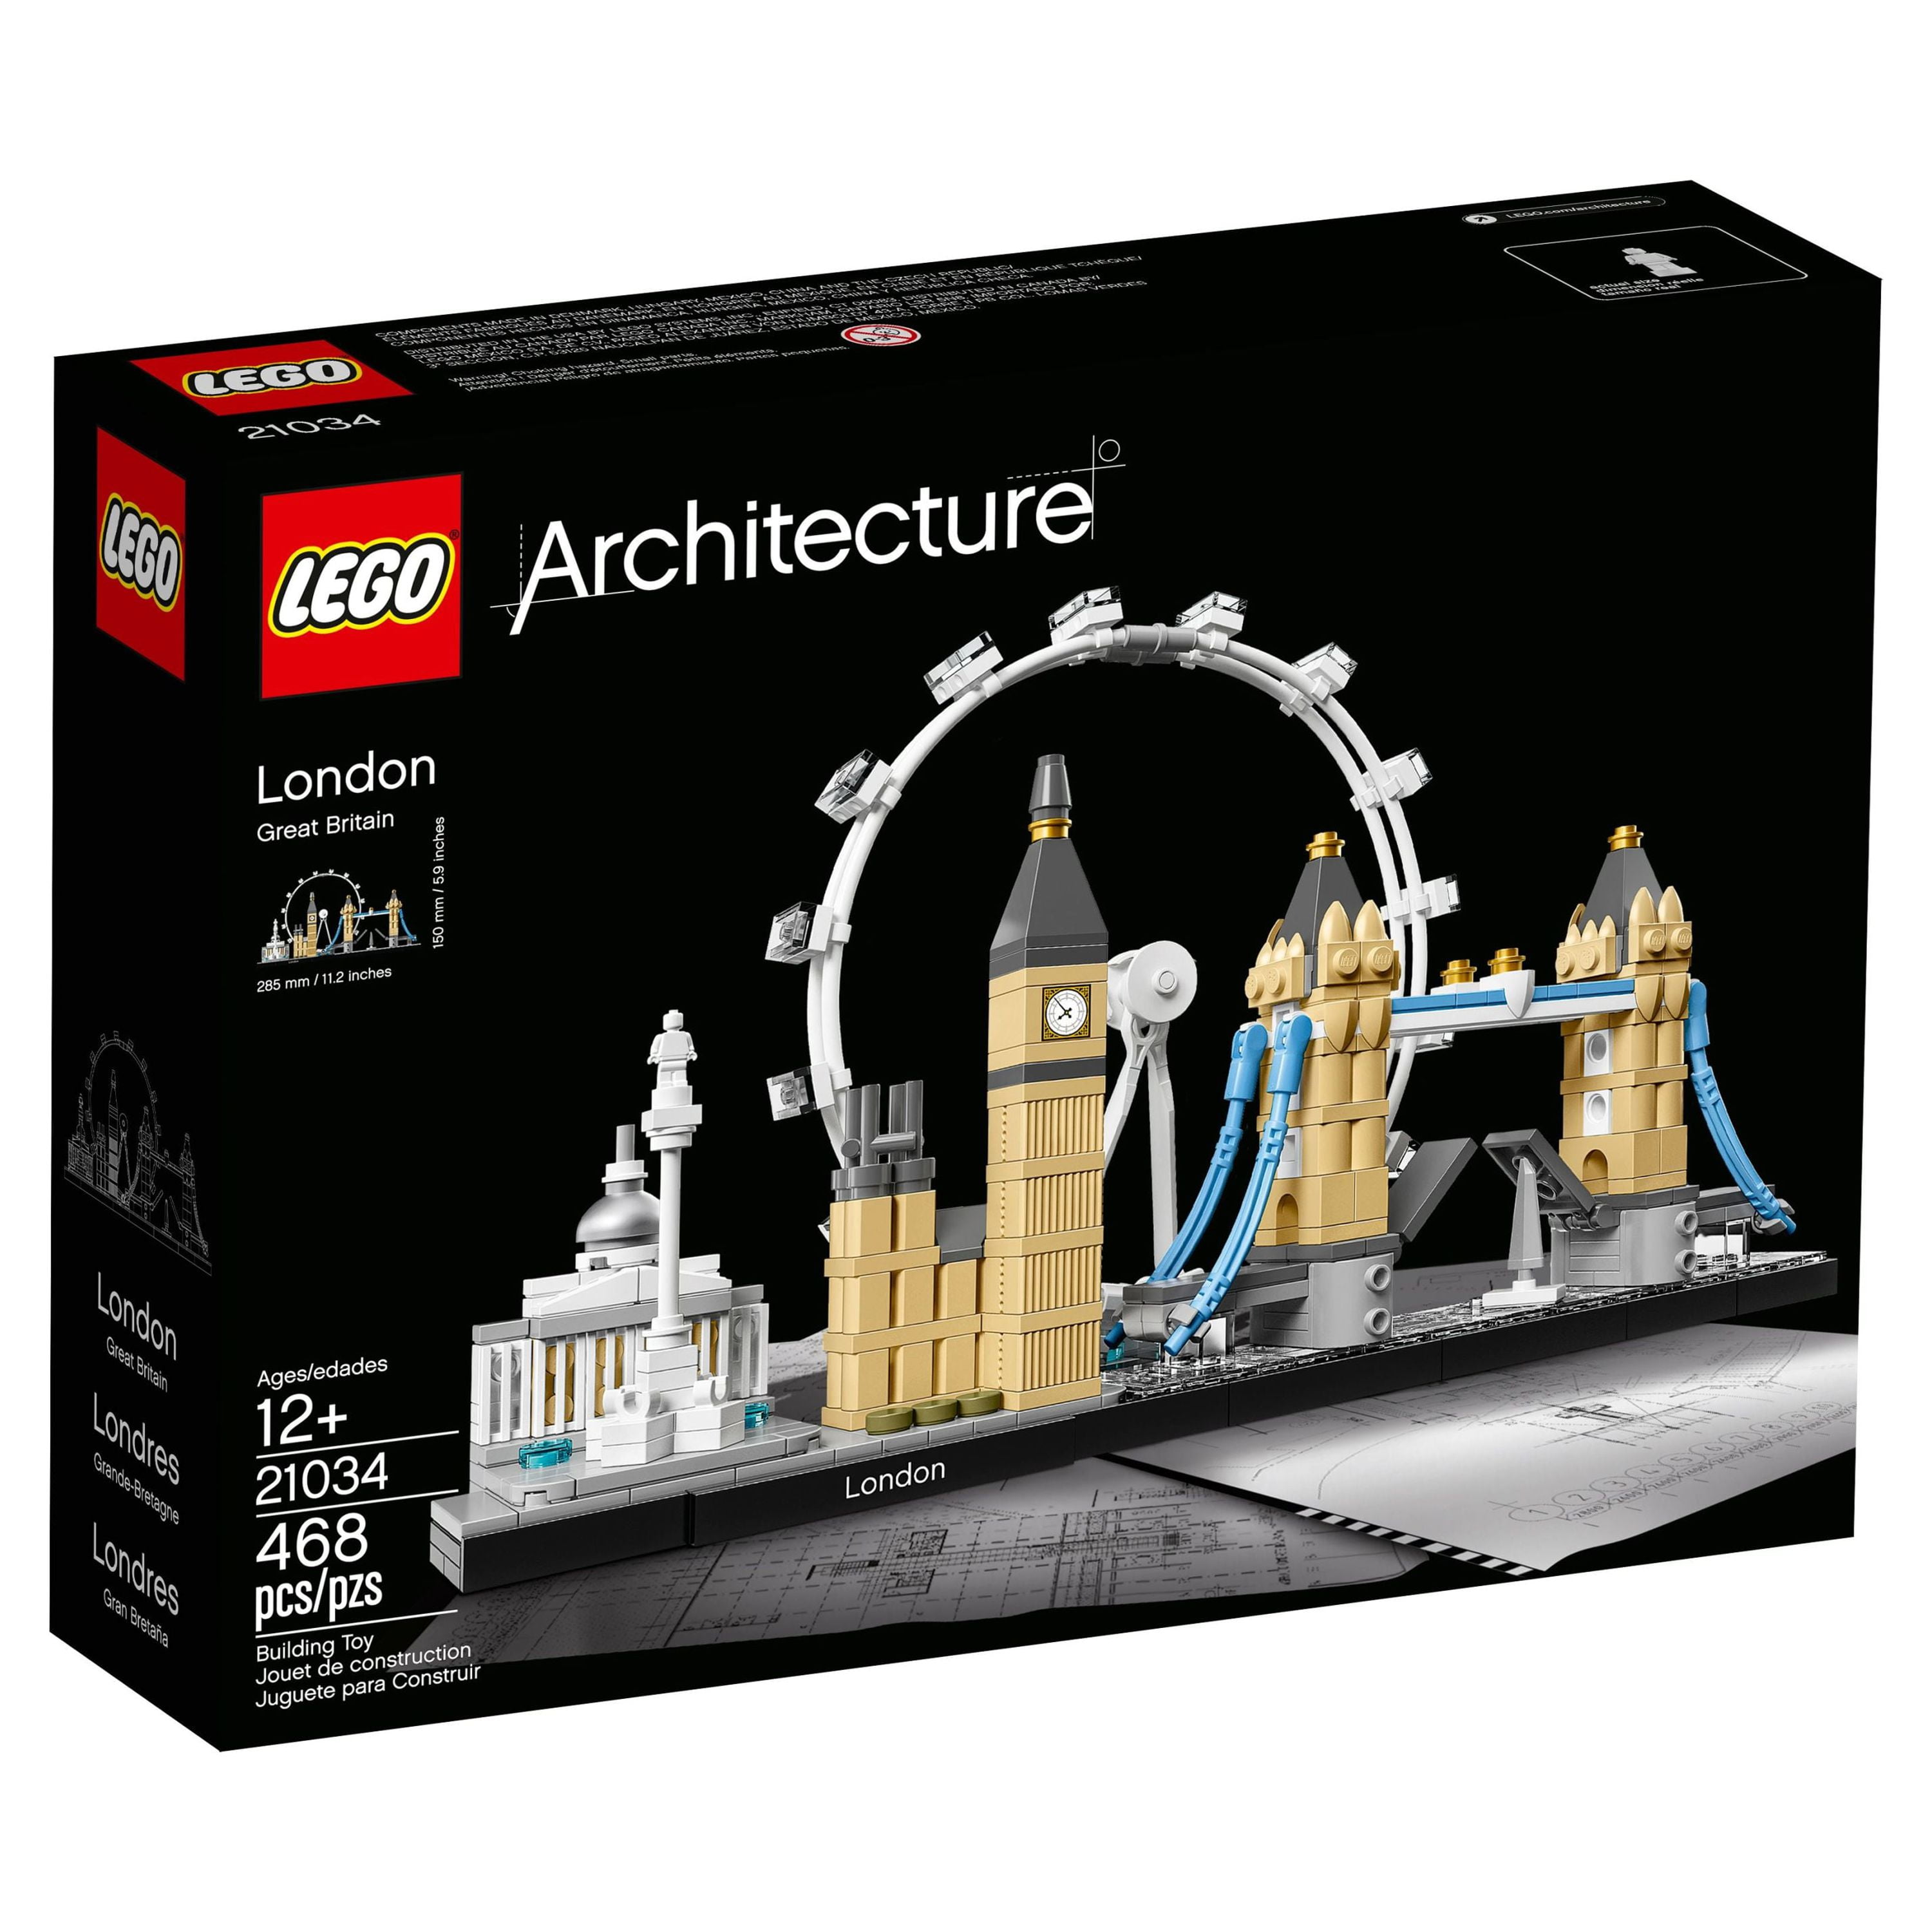 LEGO Architecture London Skyline 21034 Collectible Model Building Kit with  London Eye, Big Ben, and Tower Bridge, Office Home Décor, Skyline